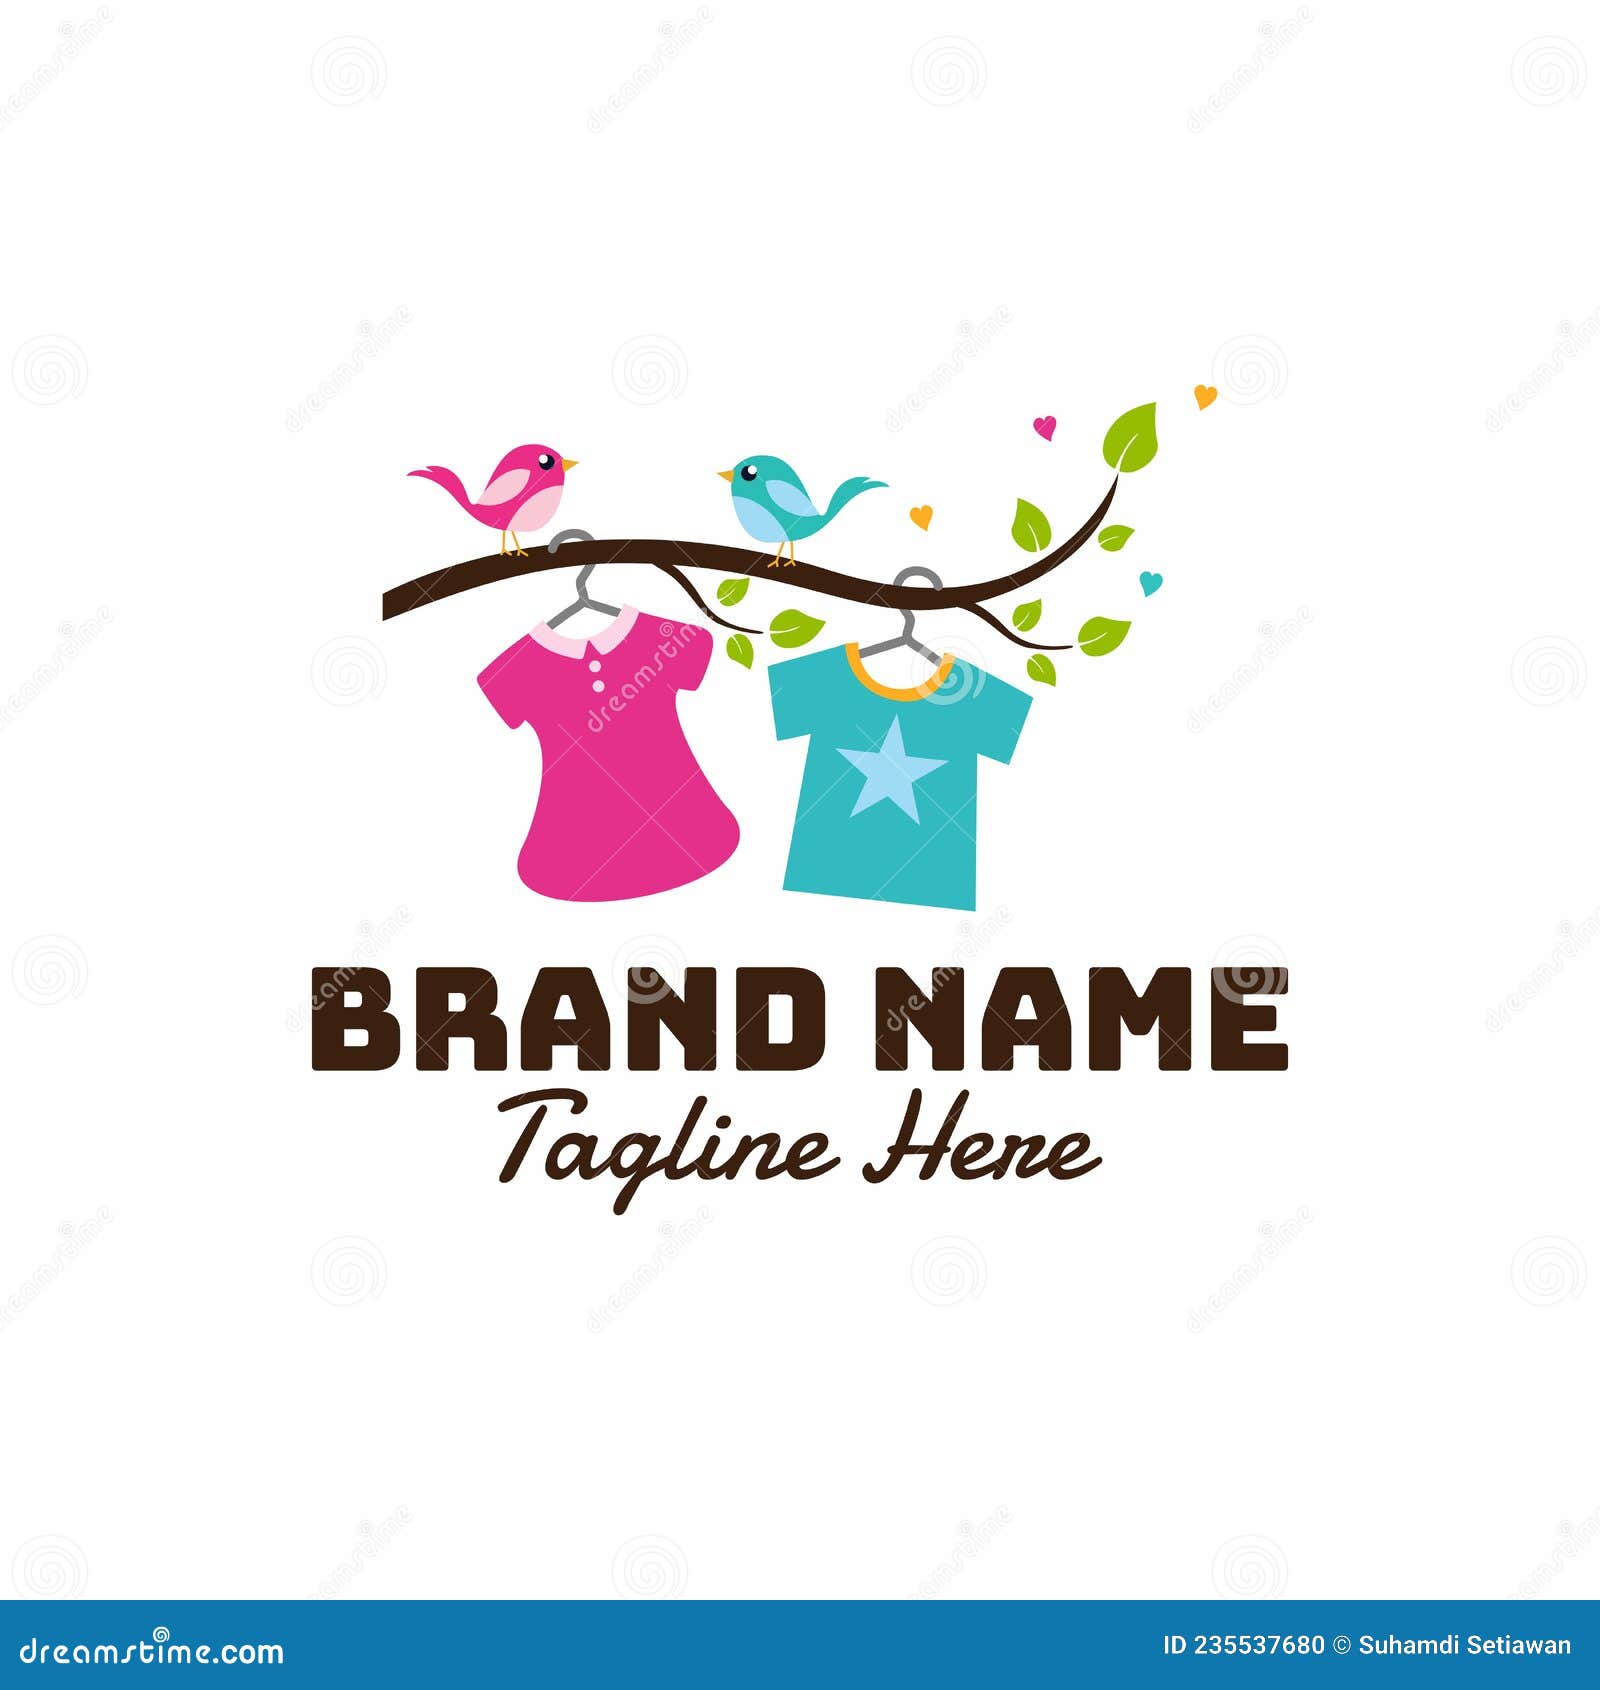 https://thumbs.dreamstime.com/z/kids-clothing-store-logo-clothes-hanging-branch-fun-children-s-apparel-235537680.jpg